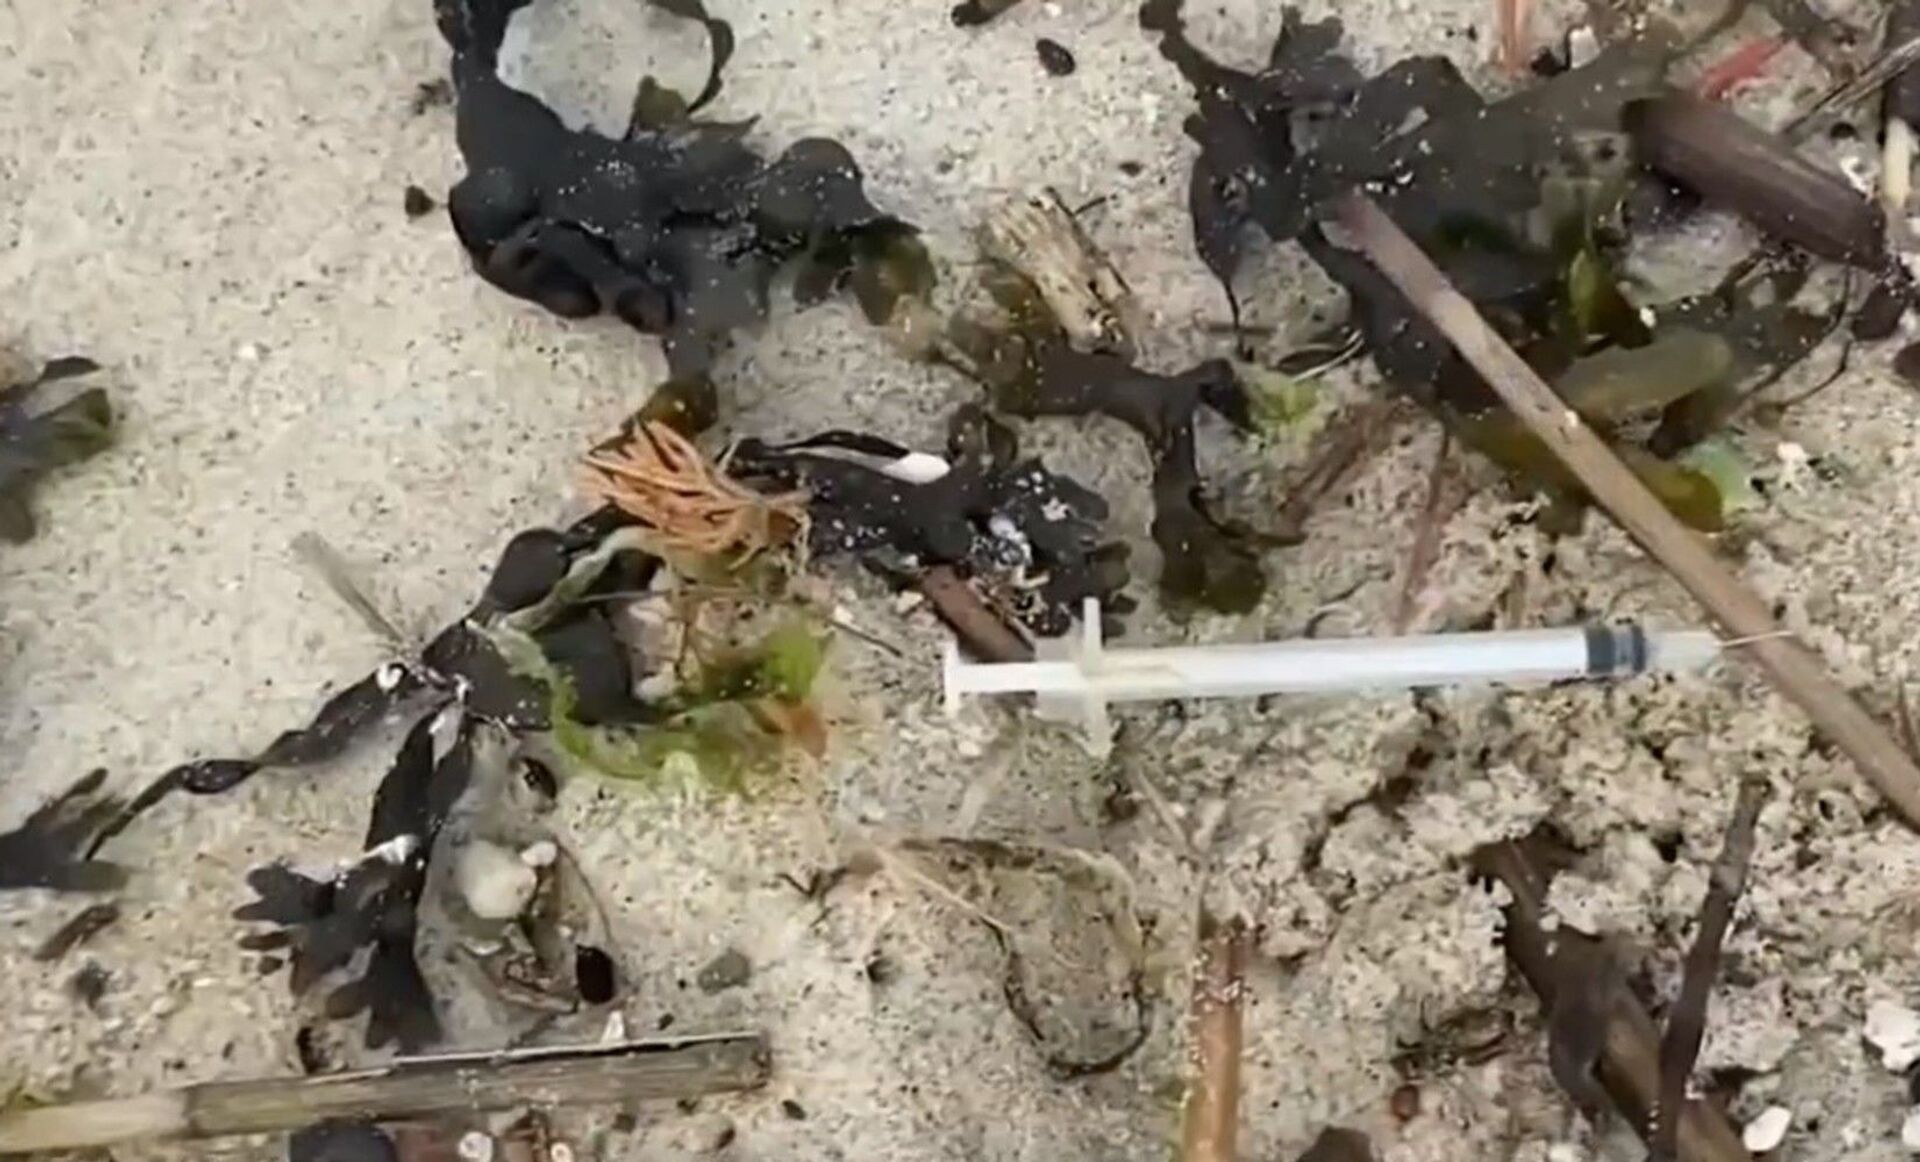 Screenshot captures one of dozens of syringes that have washed ashore along the New Jersey coastline after intense storms have overflowed the local sewer systems. - Sputnik International, 1920, 07.09.2021